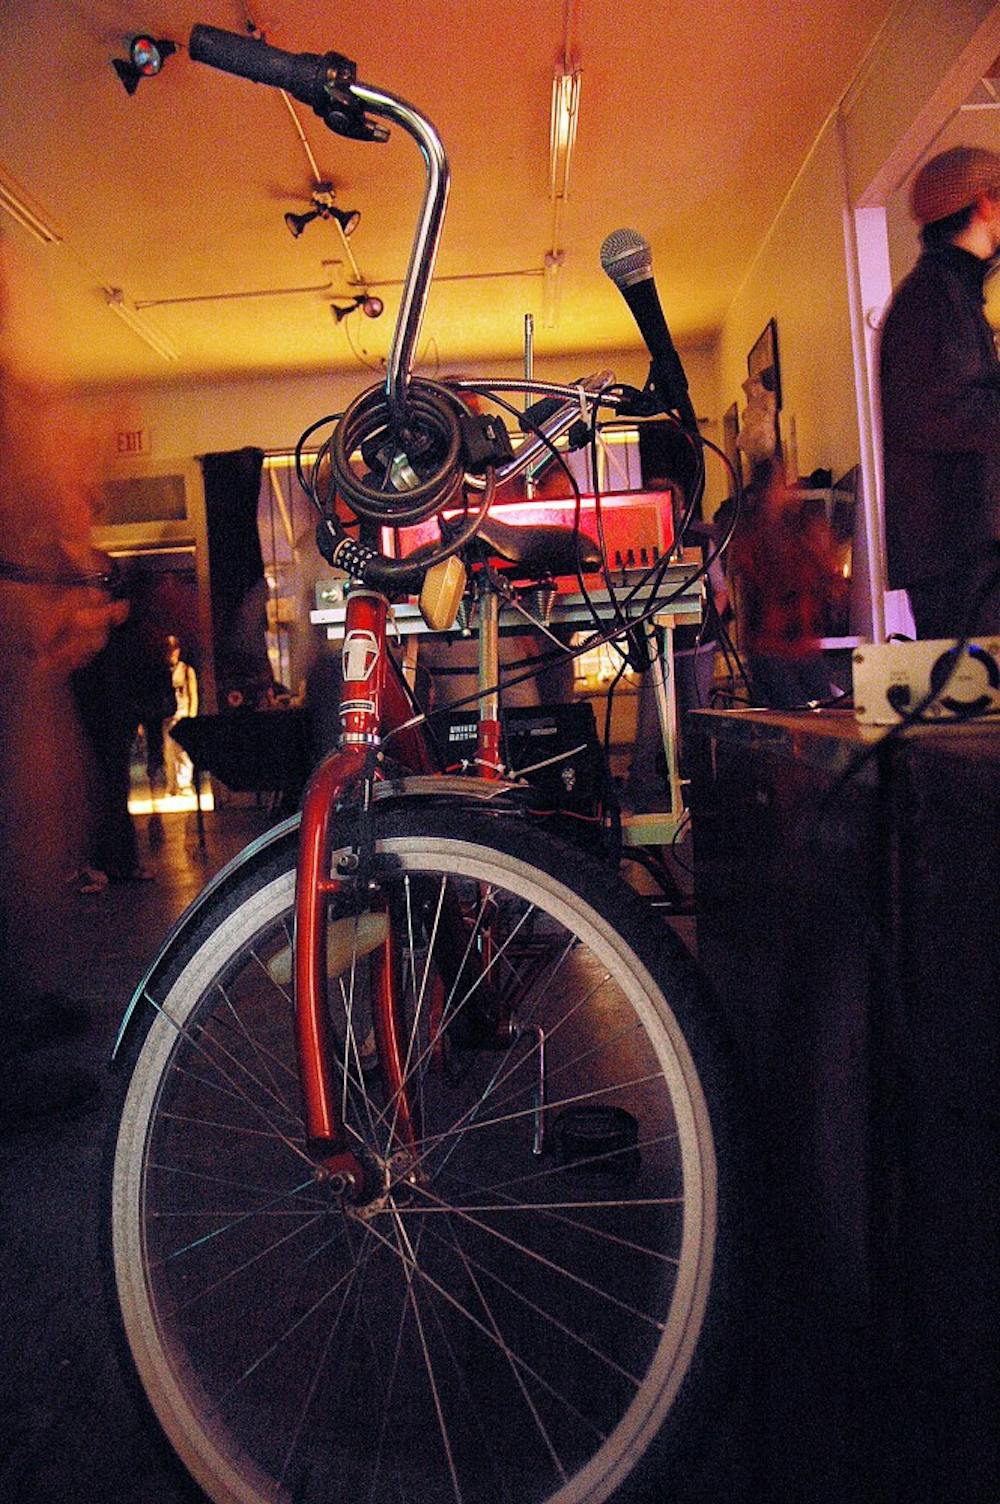 	Media arts tricycle crafted by students Seth Grant, Dylan Stevens-Sheri and Parker Jennings is displayed during a
show at Black Market Goods Gallery on Saturday. The tricycle has an FM transmitter which broadcasts its signal up to
a half-mile radius around the tricycle.